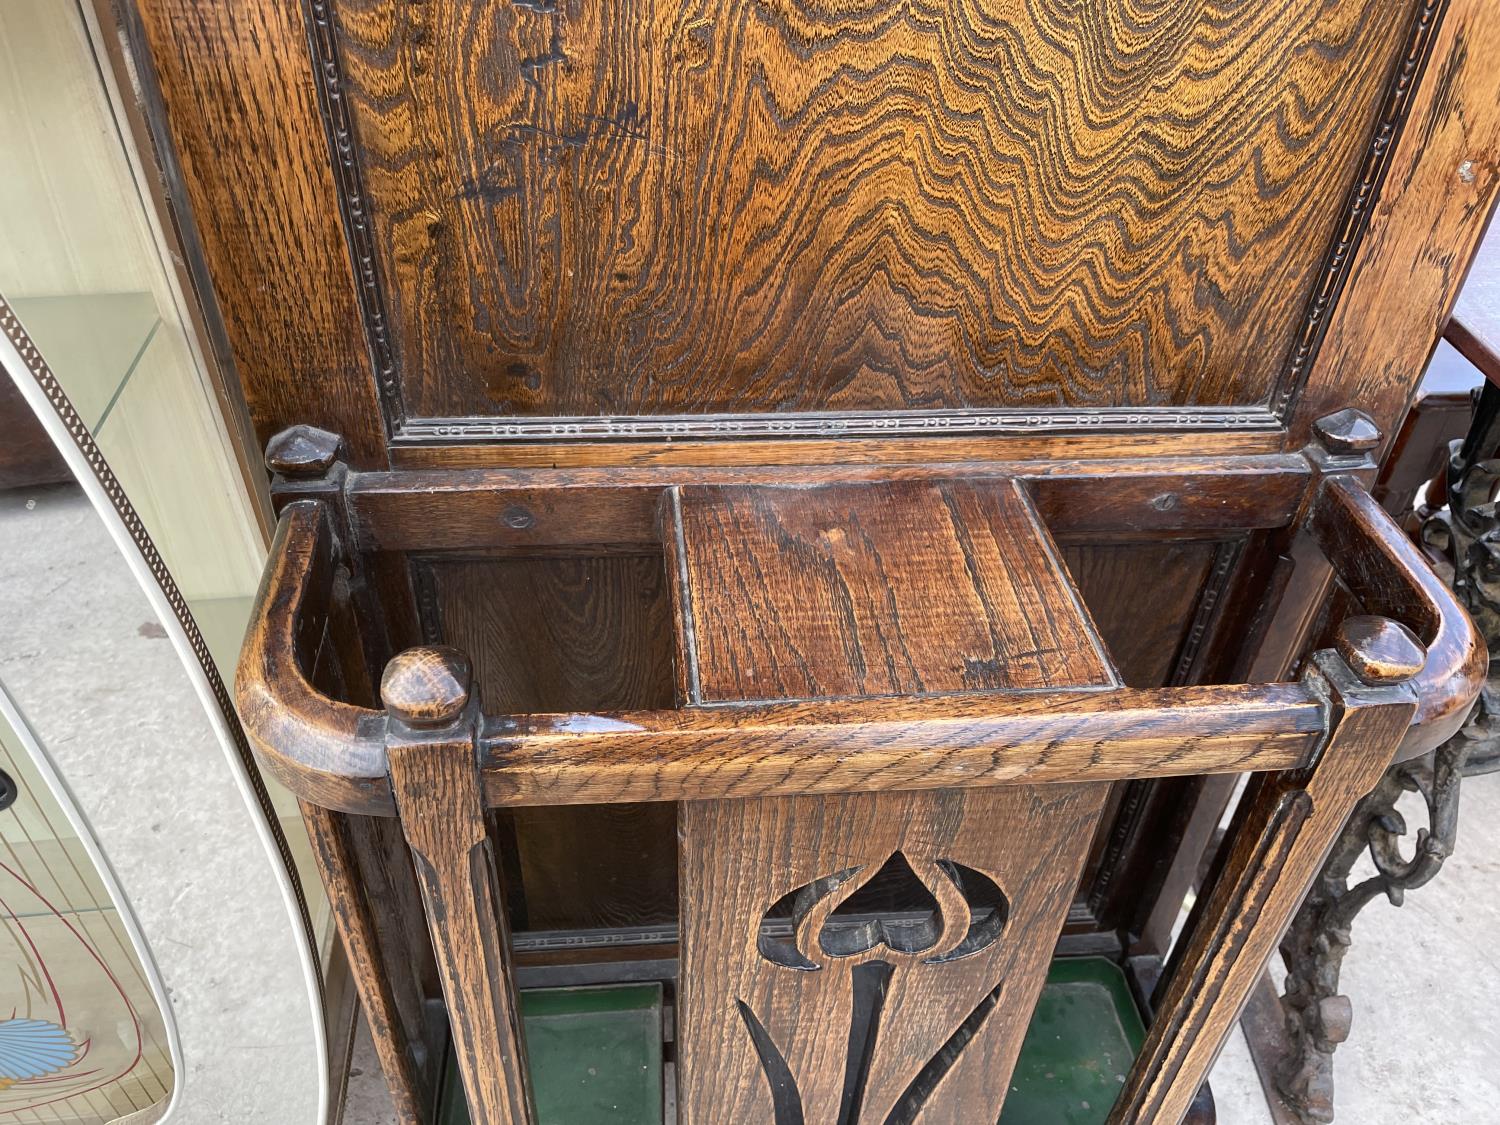 AN EARLY 20TH CENTURY OAK HALL COAT/STICK STAND WITH ART NOUVEAU STYLE PIERCED FRONT PANEL, 25" WIDE - Image 4 of 6